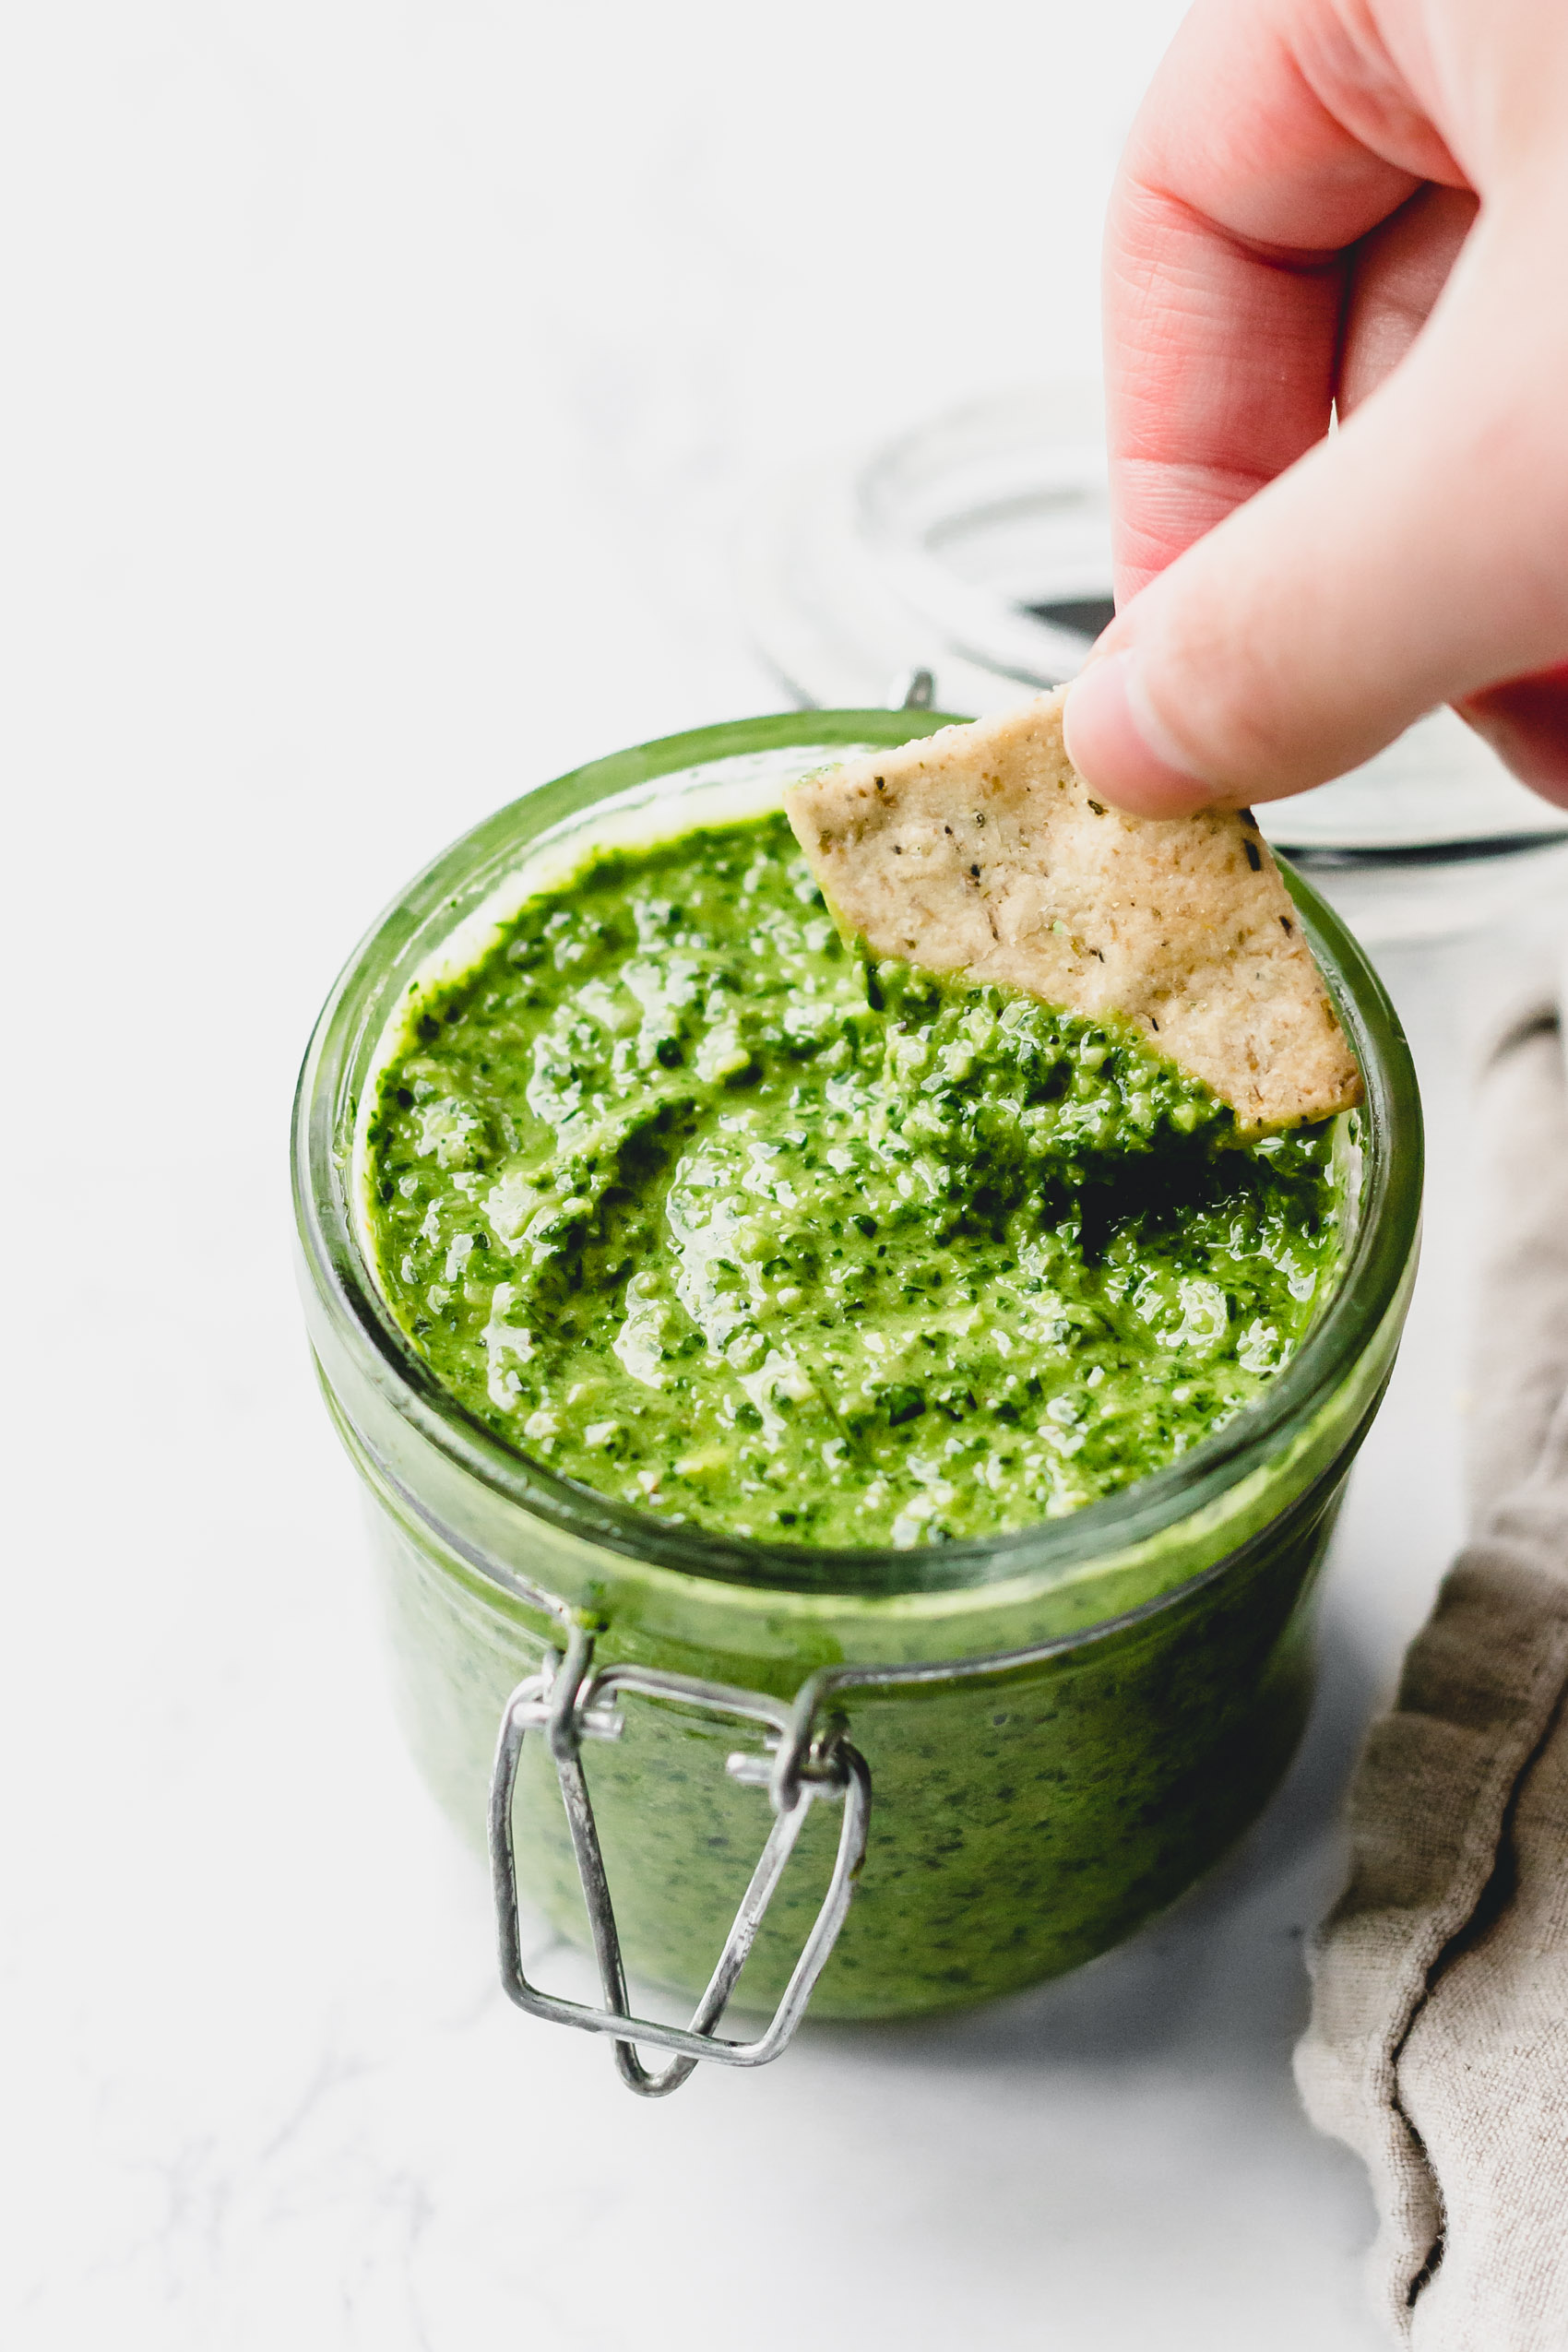 a cracker being dipped into a jar of pesto